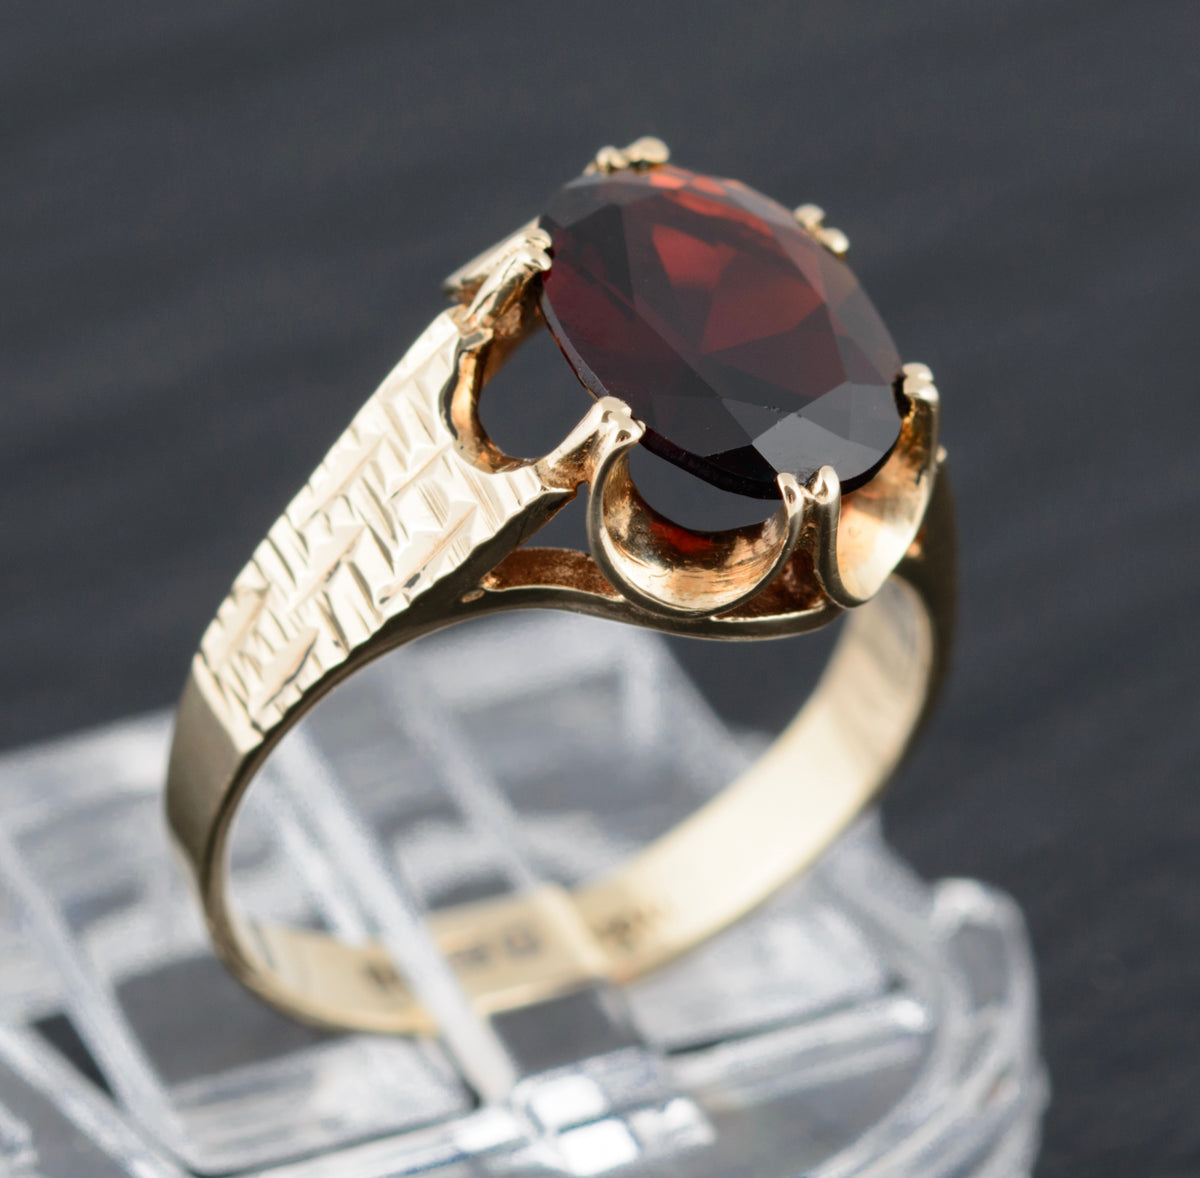 Vintage 9ct Gold Ring With Garnet Natural Gemstone 1970's Retro (A1503)